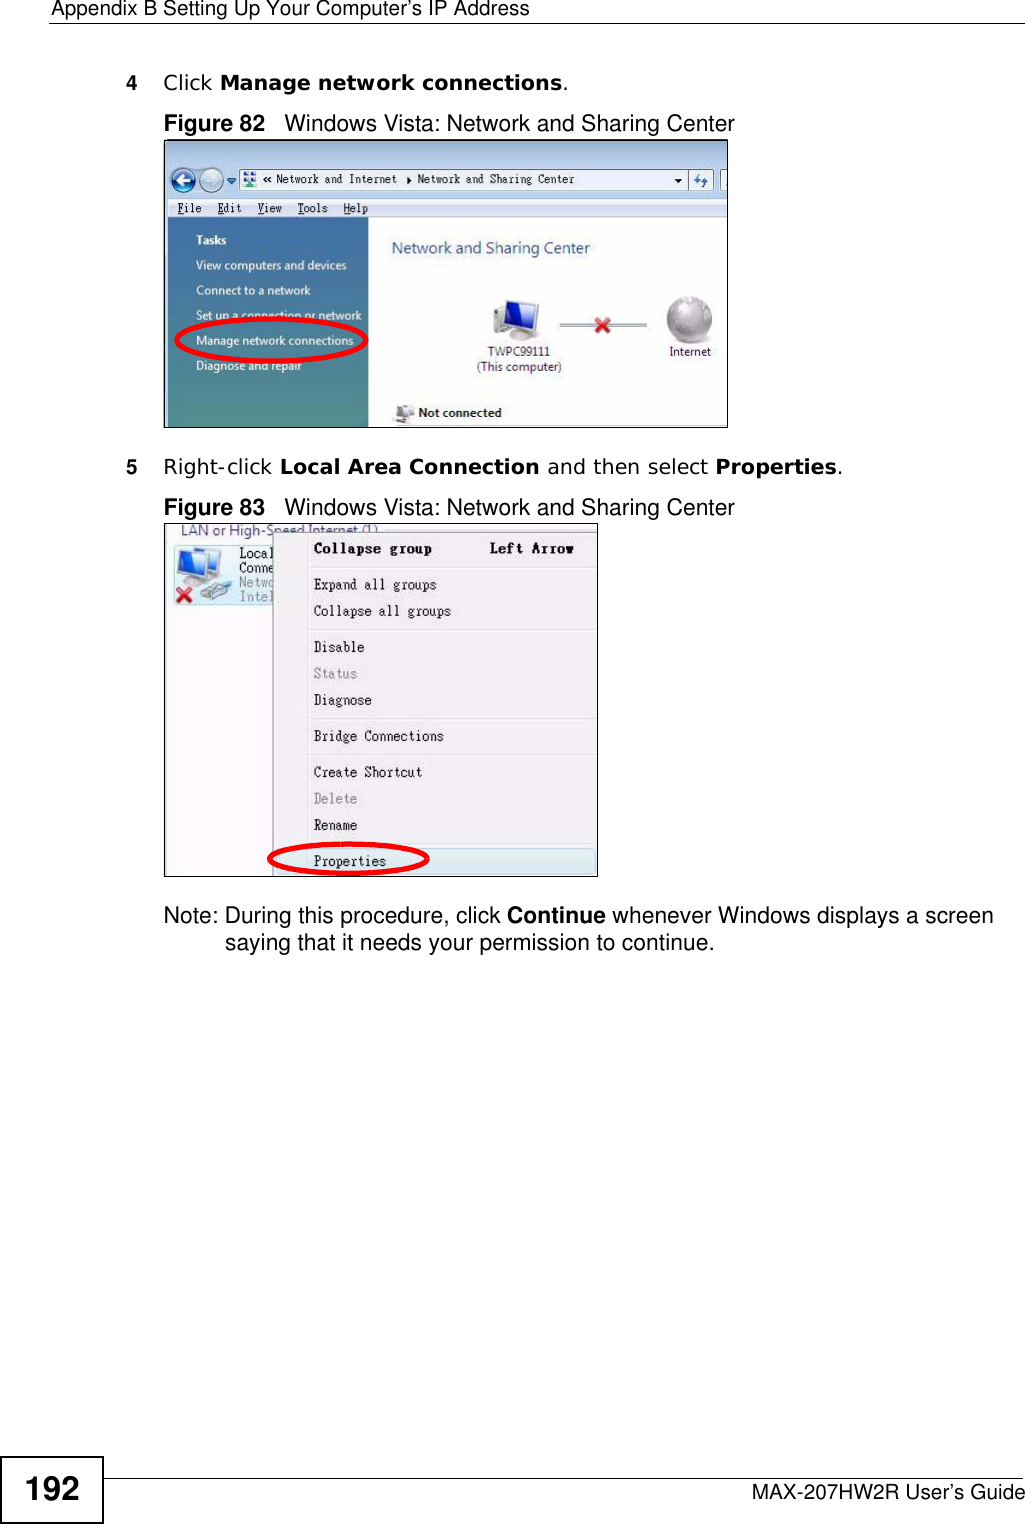 Appendix B Setting Up Your Computer’s IP AddressMAX-207HW2R User’s Guide1924Click Manage network connections.Figure 82   Windows Vista: Network and Sharing Center5Right-click Local Area Connection and then select Properties.Figure 83   Windows Vista: Network and Sharing CenterNote: During this procedure, click Continue whenever Windows displays a screen saying that it needs your permission to continue.